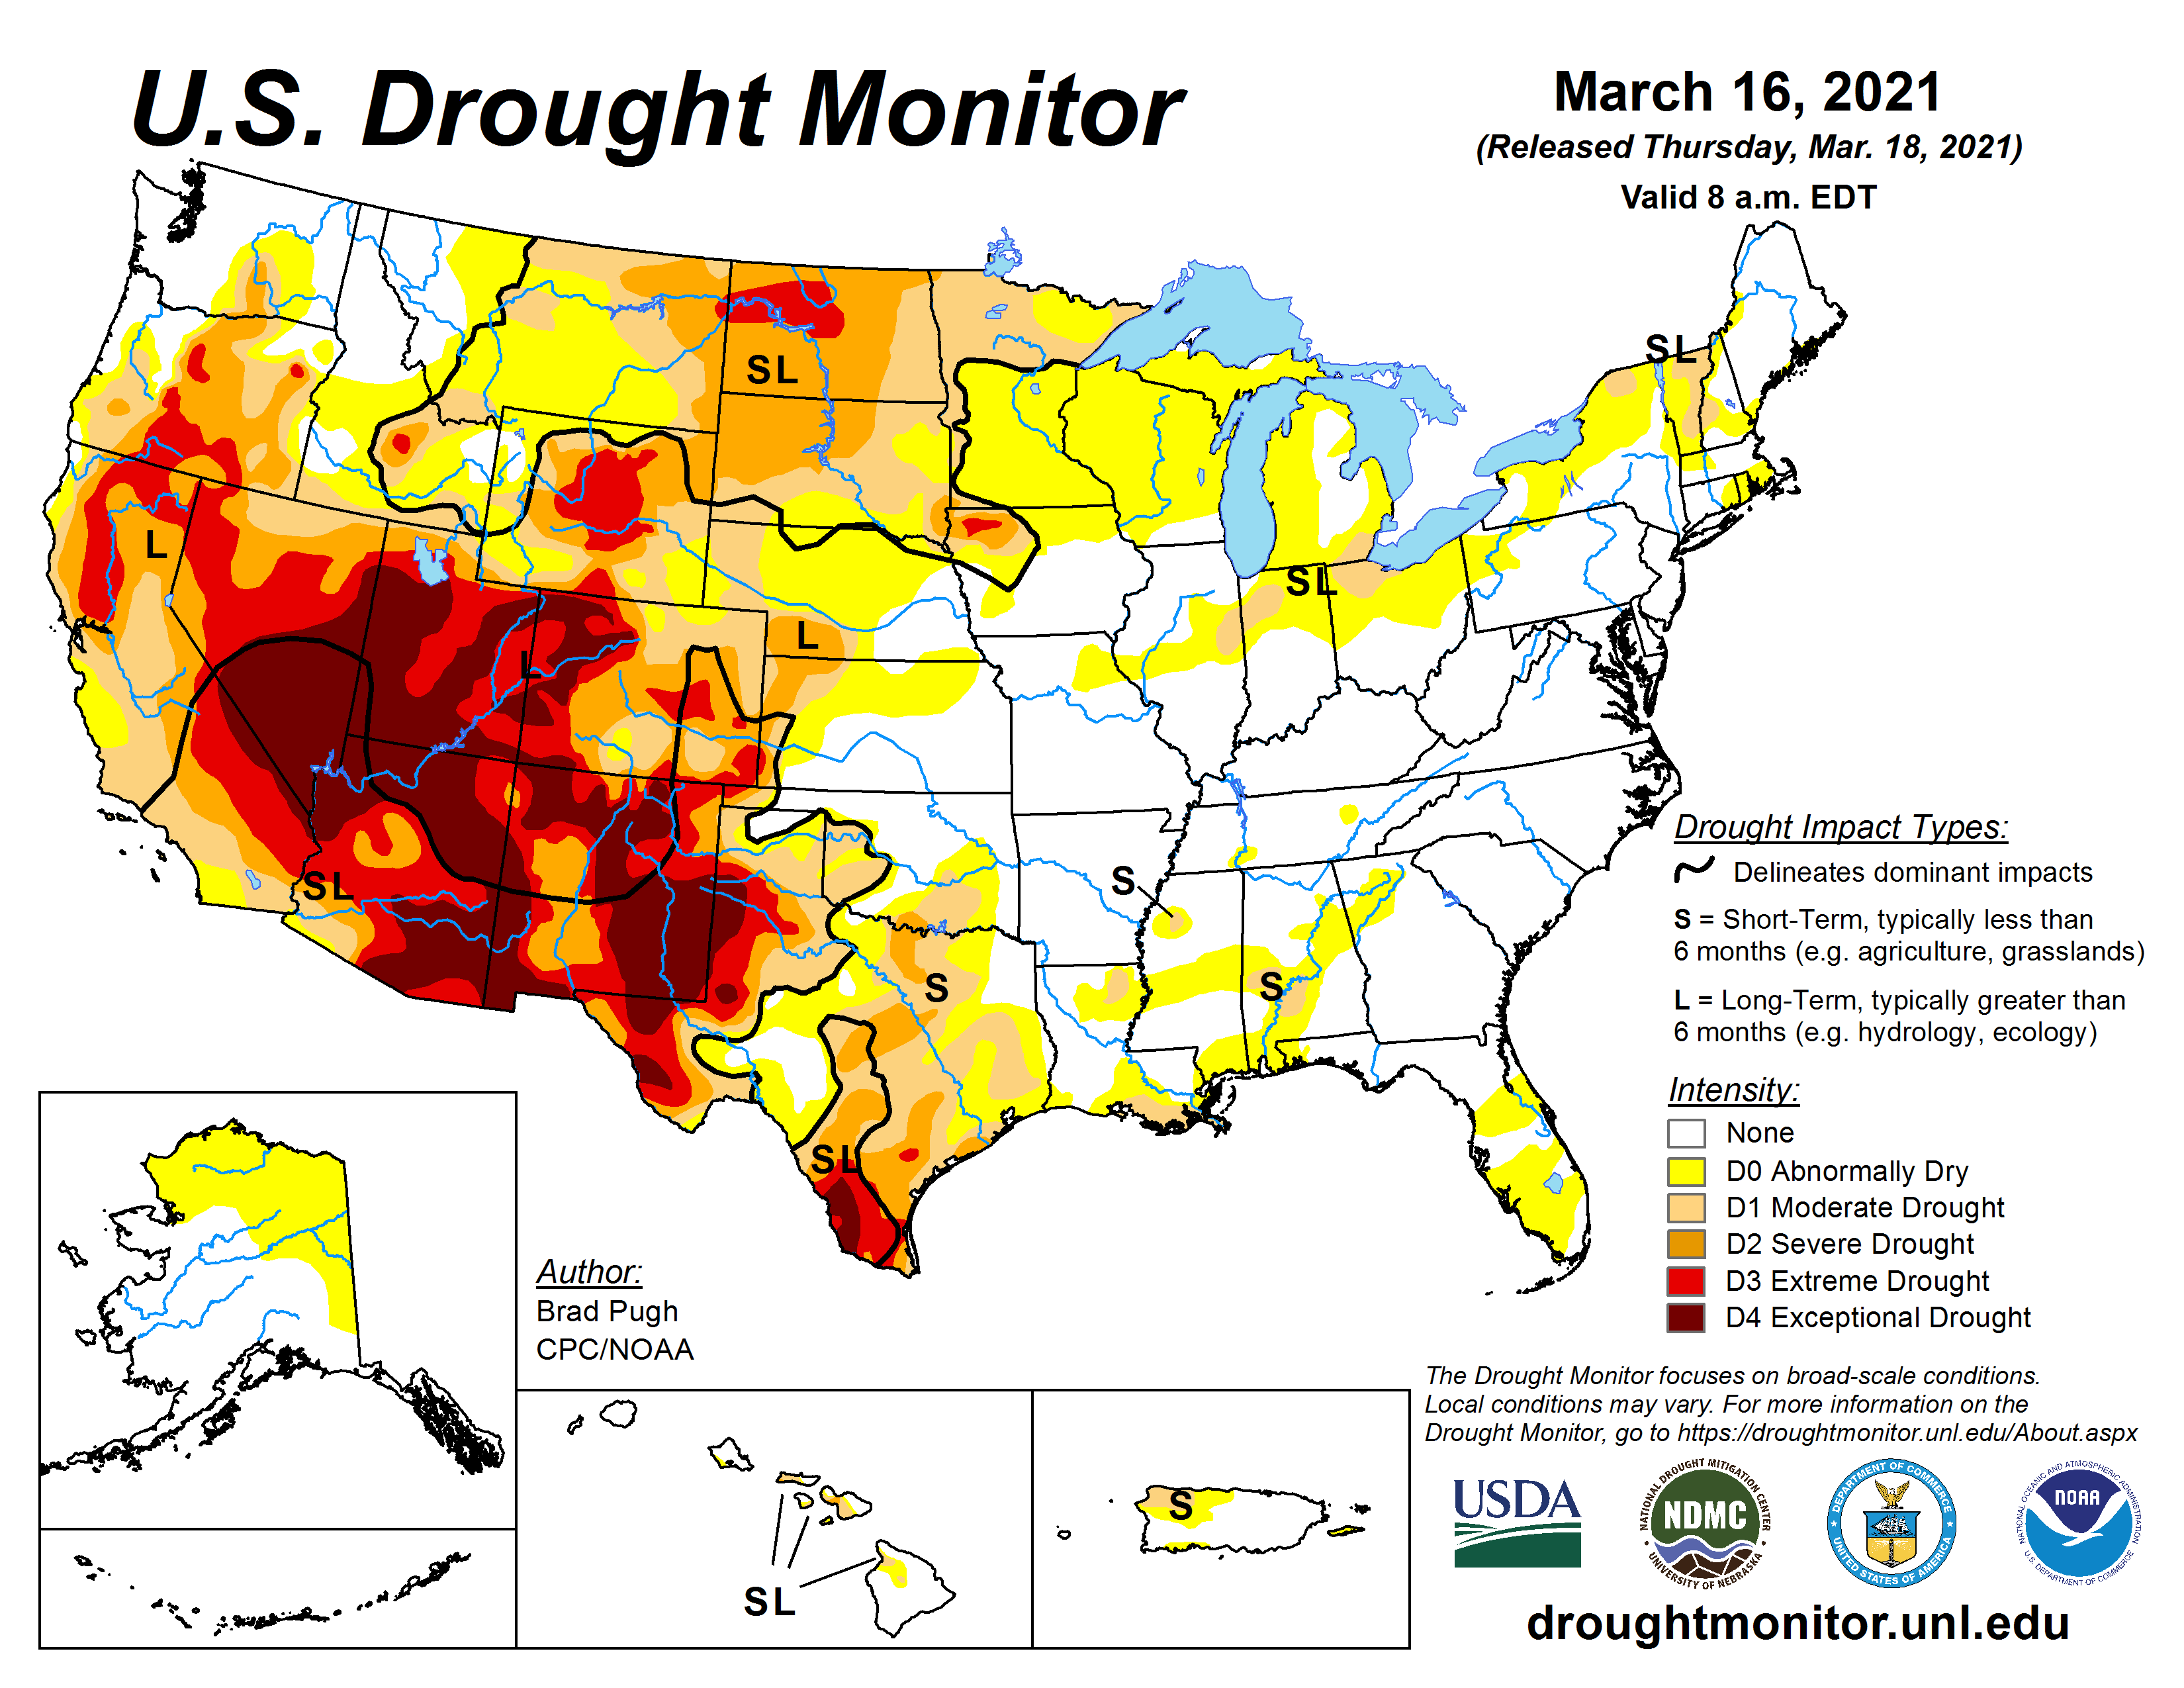 U.S. Drought Monitor map for the U.S. and Puerto Rico as of March 16, 2021. Conditions in the Central Plains improved, but the Northern Plains worsened since December 22, 2020. Conditions in the West slightly improved but are still dire.